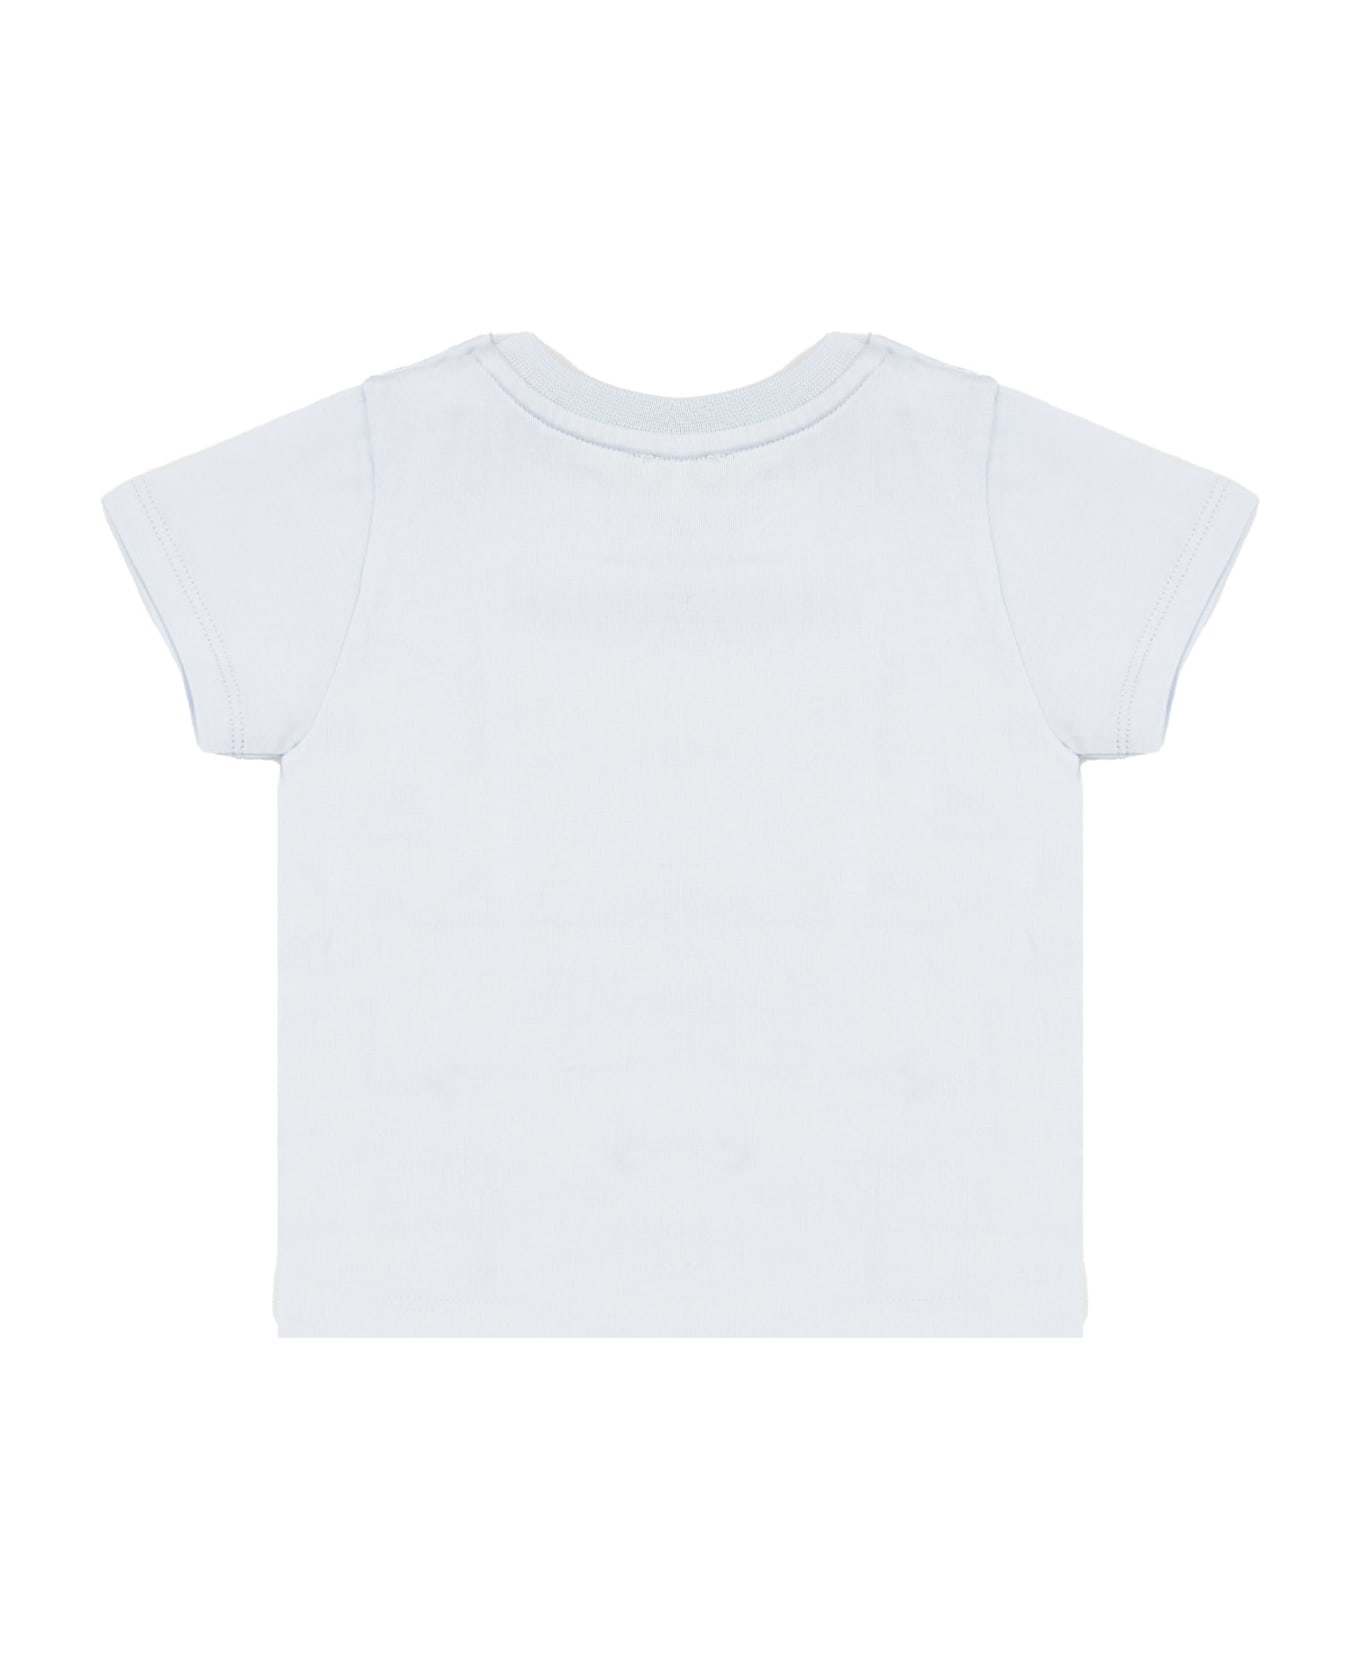 Givenchy Cotton T-shirt - White Tシャツ＆ポロシャツ